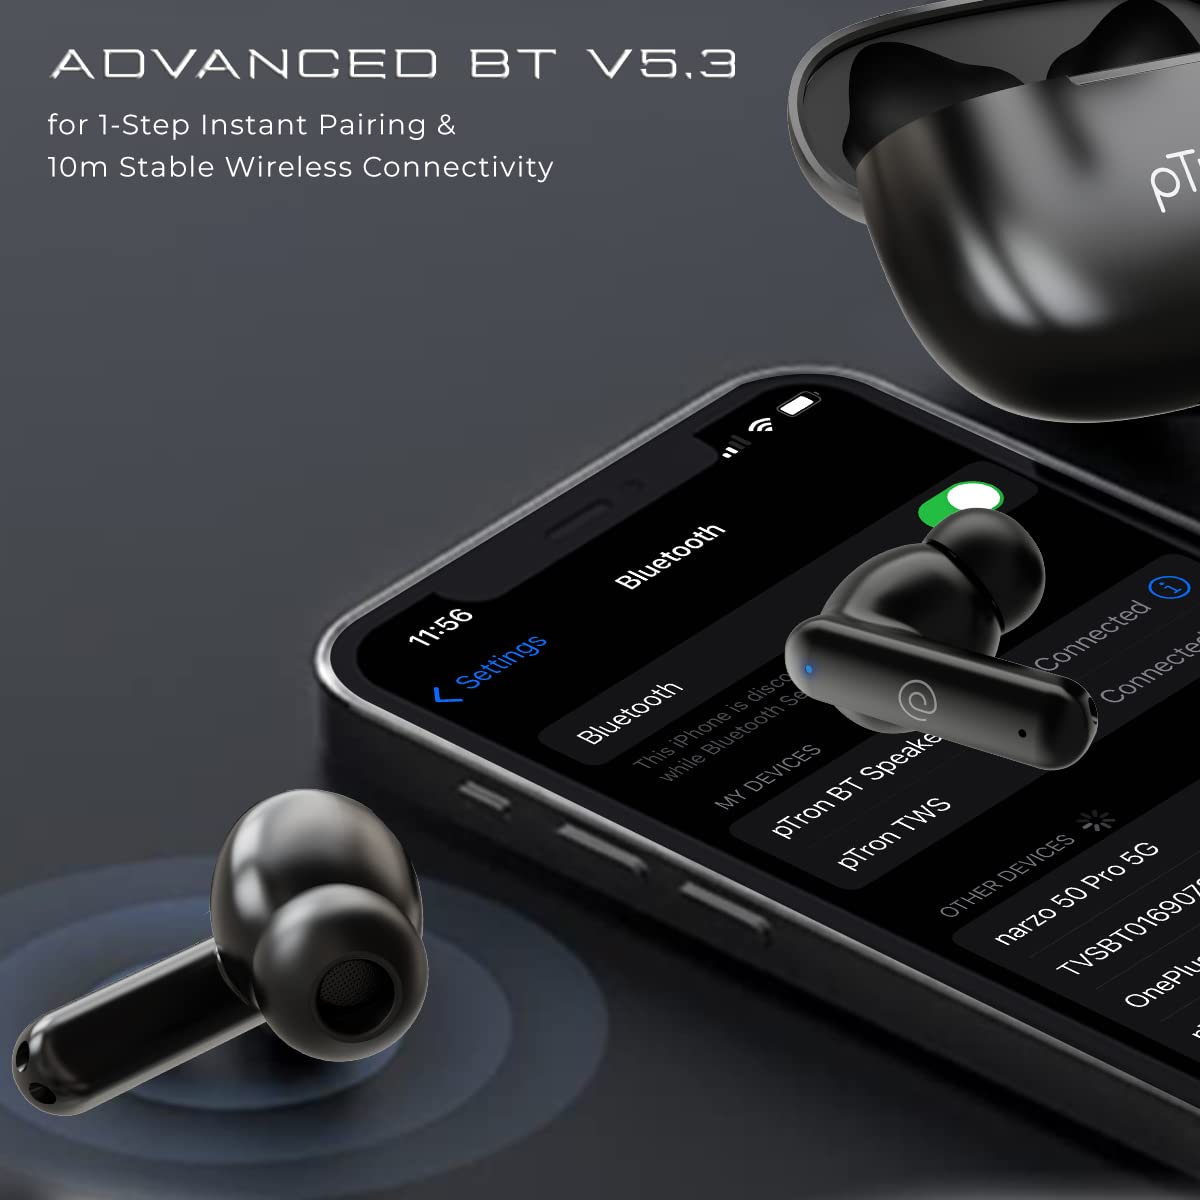 pTron Newly Launched Bassbuds Zen in-Ear TWS Earbuds with Quad ENC Mic & TruTalk™, 50Hrs Playtime, BT5.3 Headphone with Mic, Deep Bass, Low Latency, Touch Control, Type-C Fast Charging & IPX4 (Black)